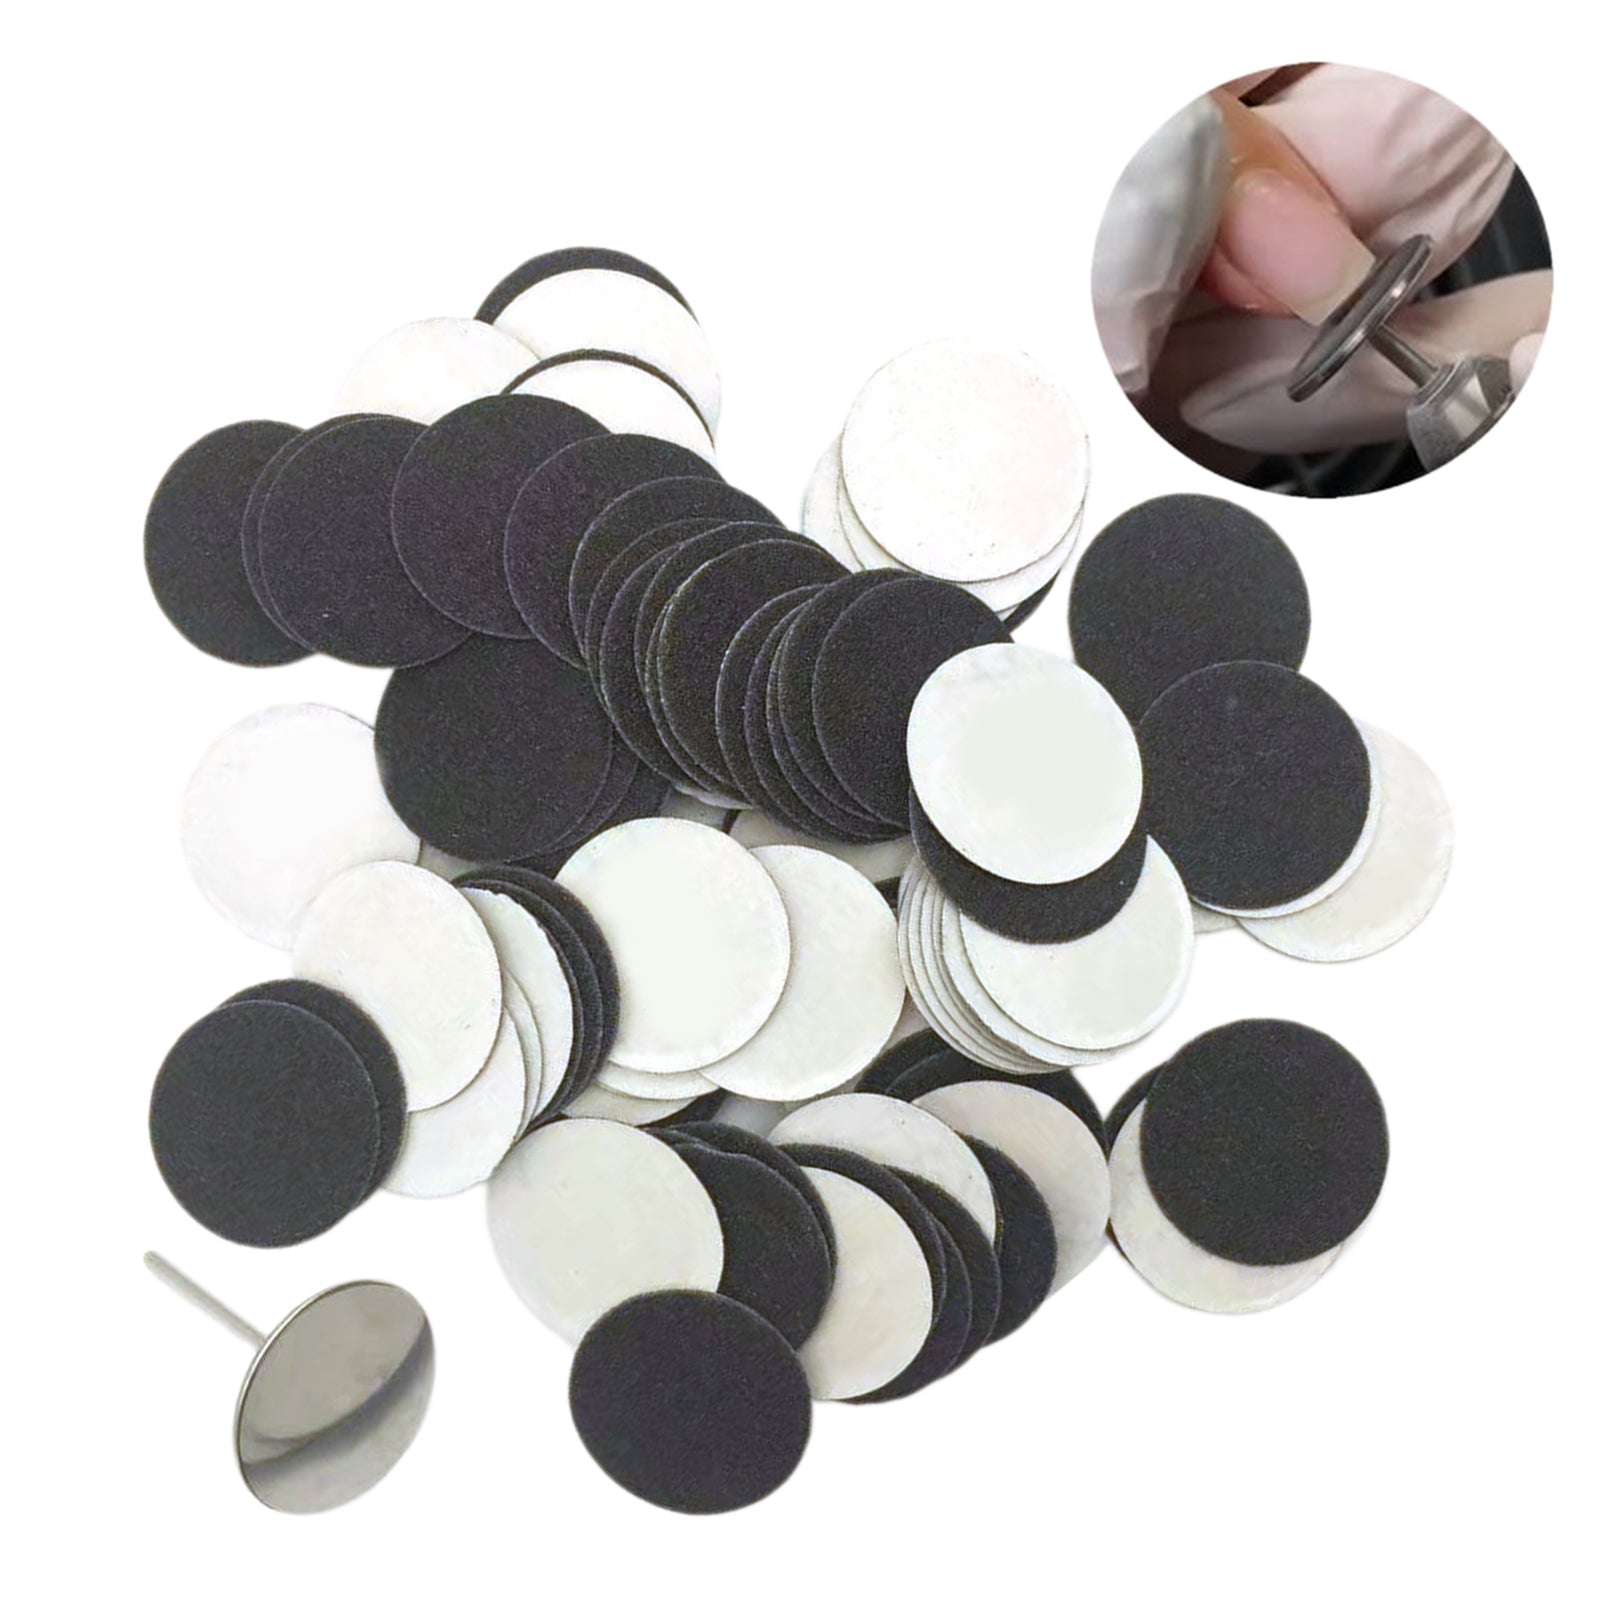 Sand Paper Replacement Pads For Electric Foot File  25mm 80Grit 100Pcs